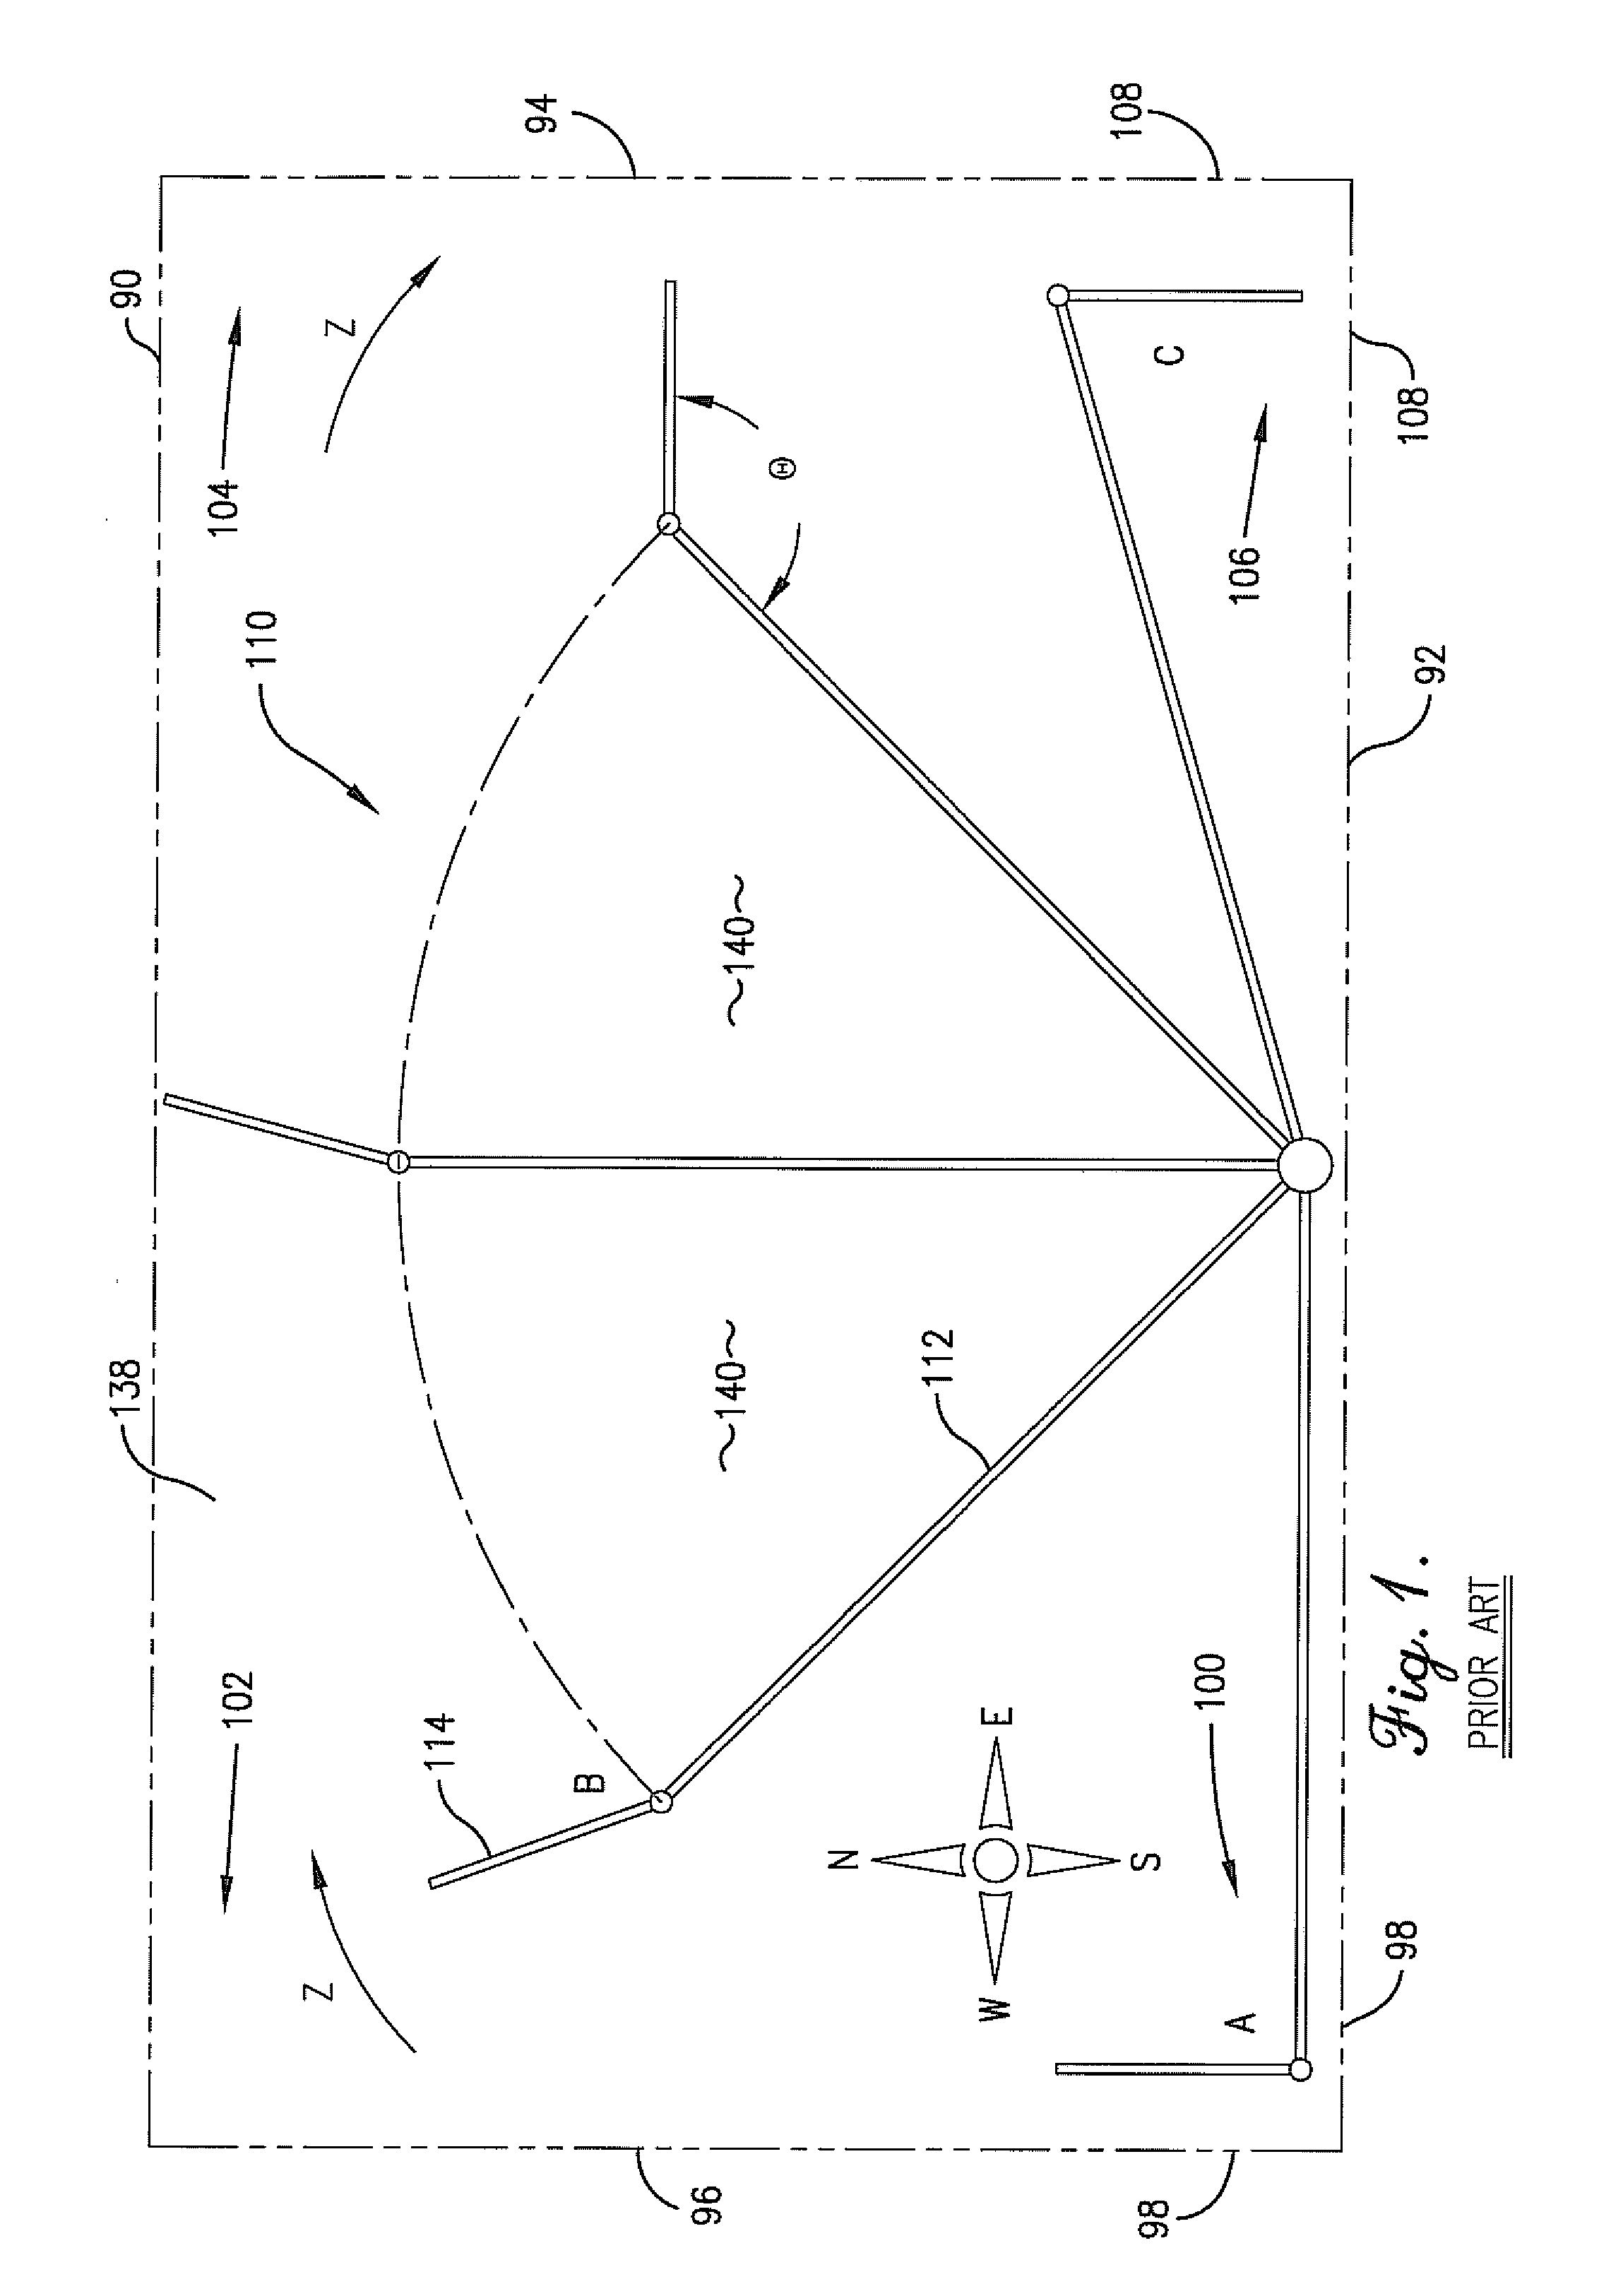 Method, apparatus, and computer program for irrigating a field space with a center pivot irrigation machine